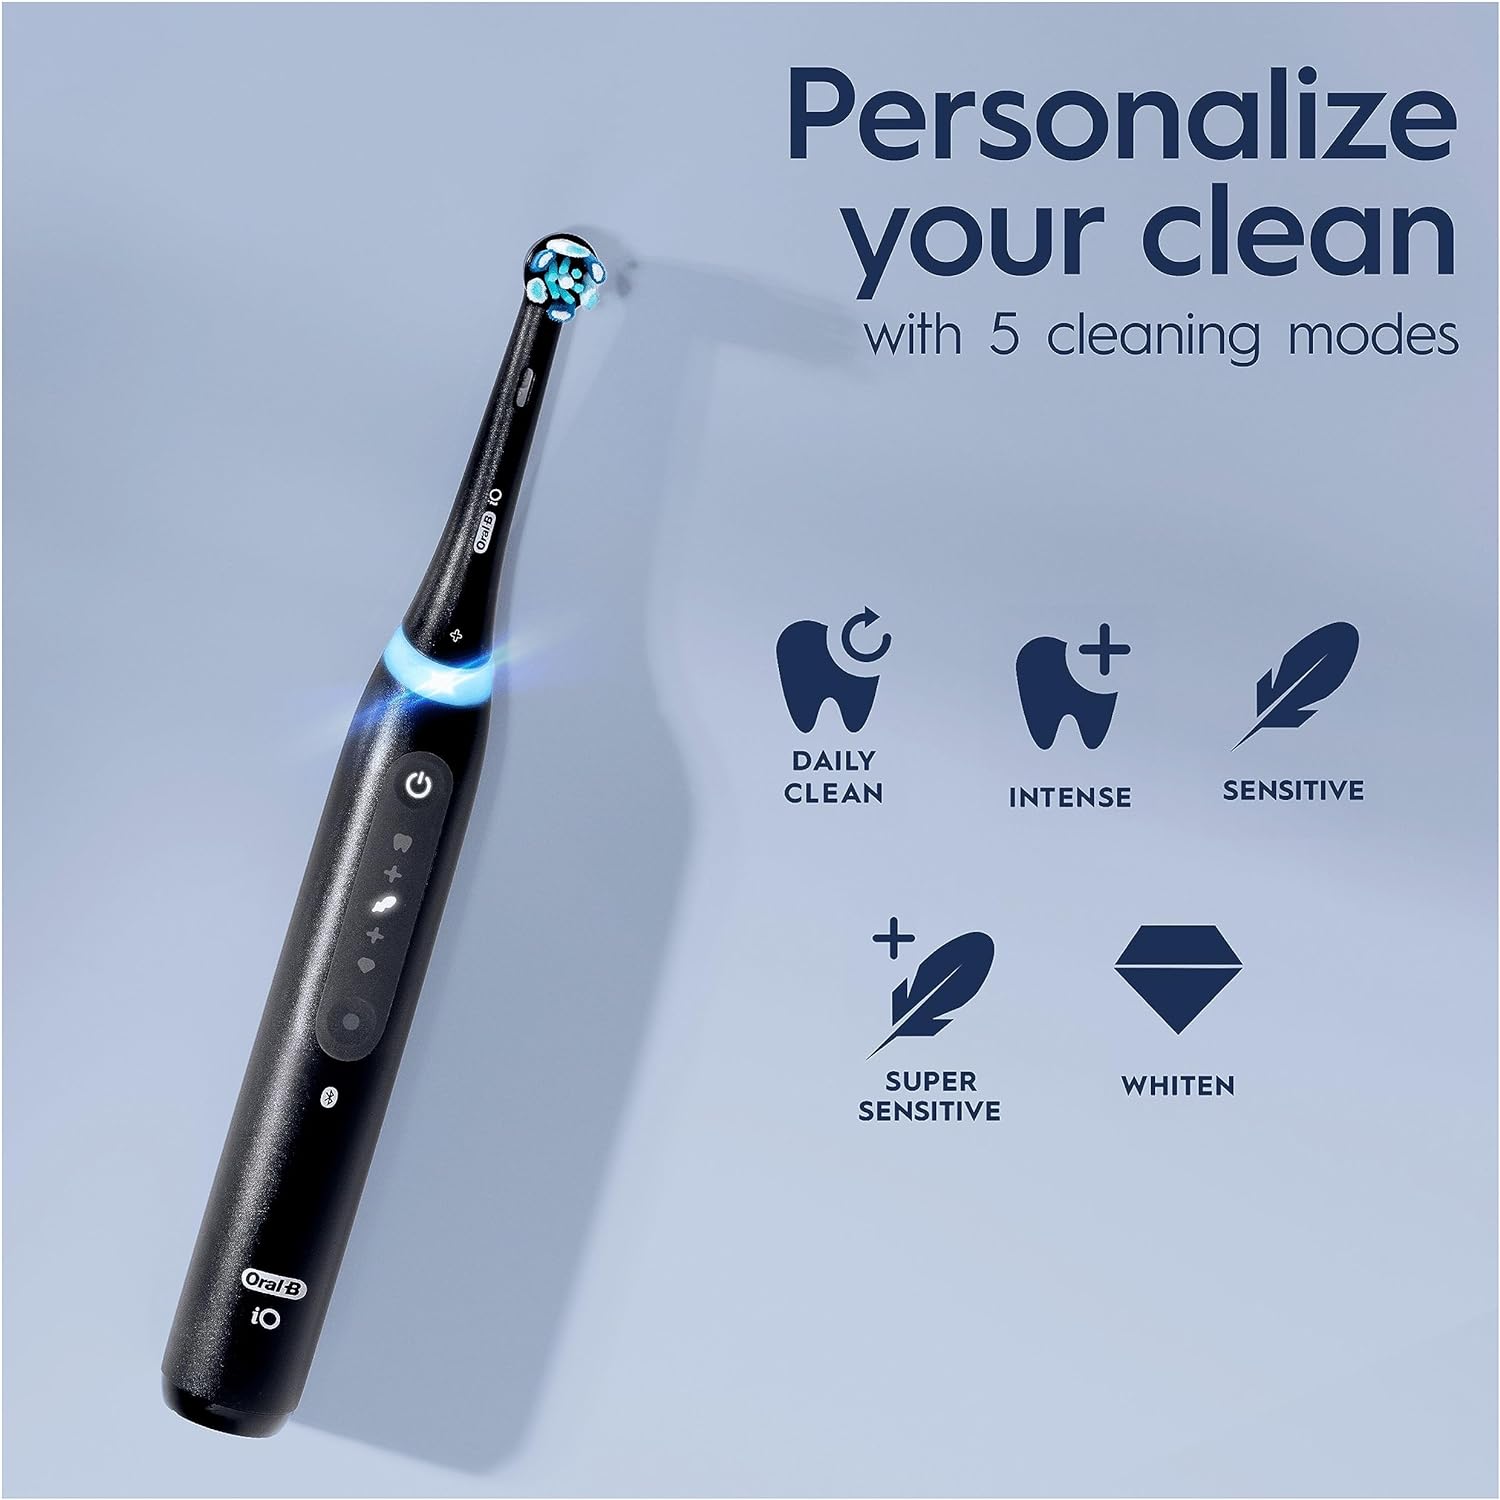 Oral-B iO 5 Electric Toothbrush, with Revolutionary Magnetic Technology - Matt Black